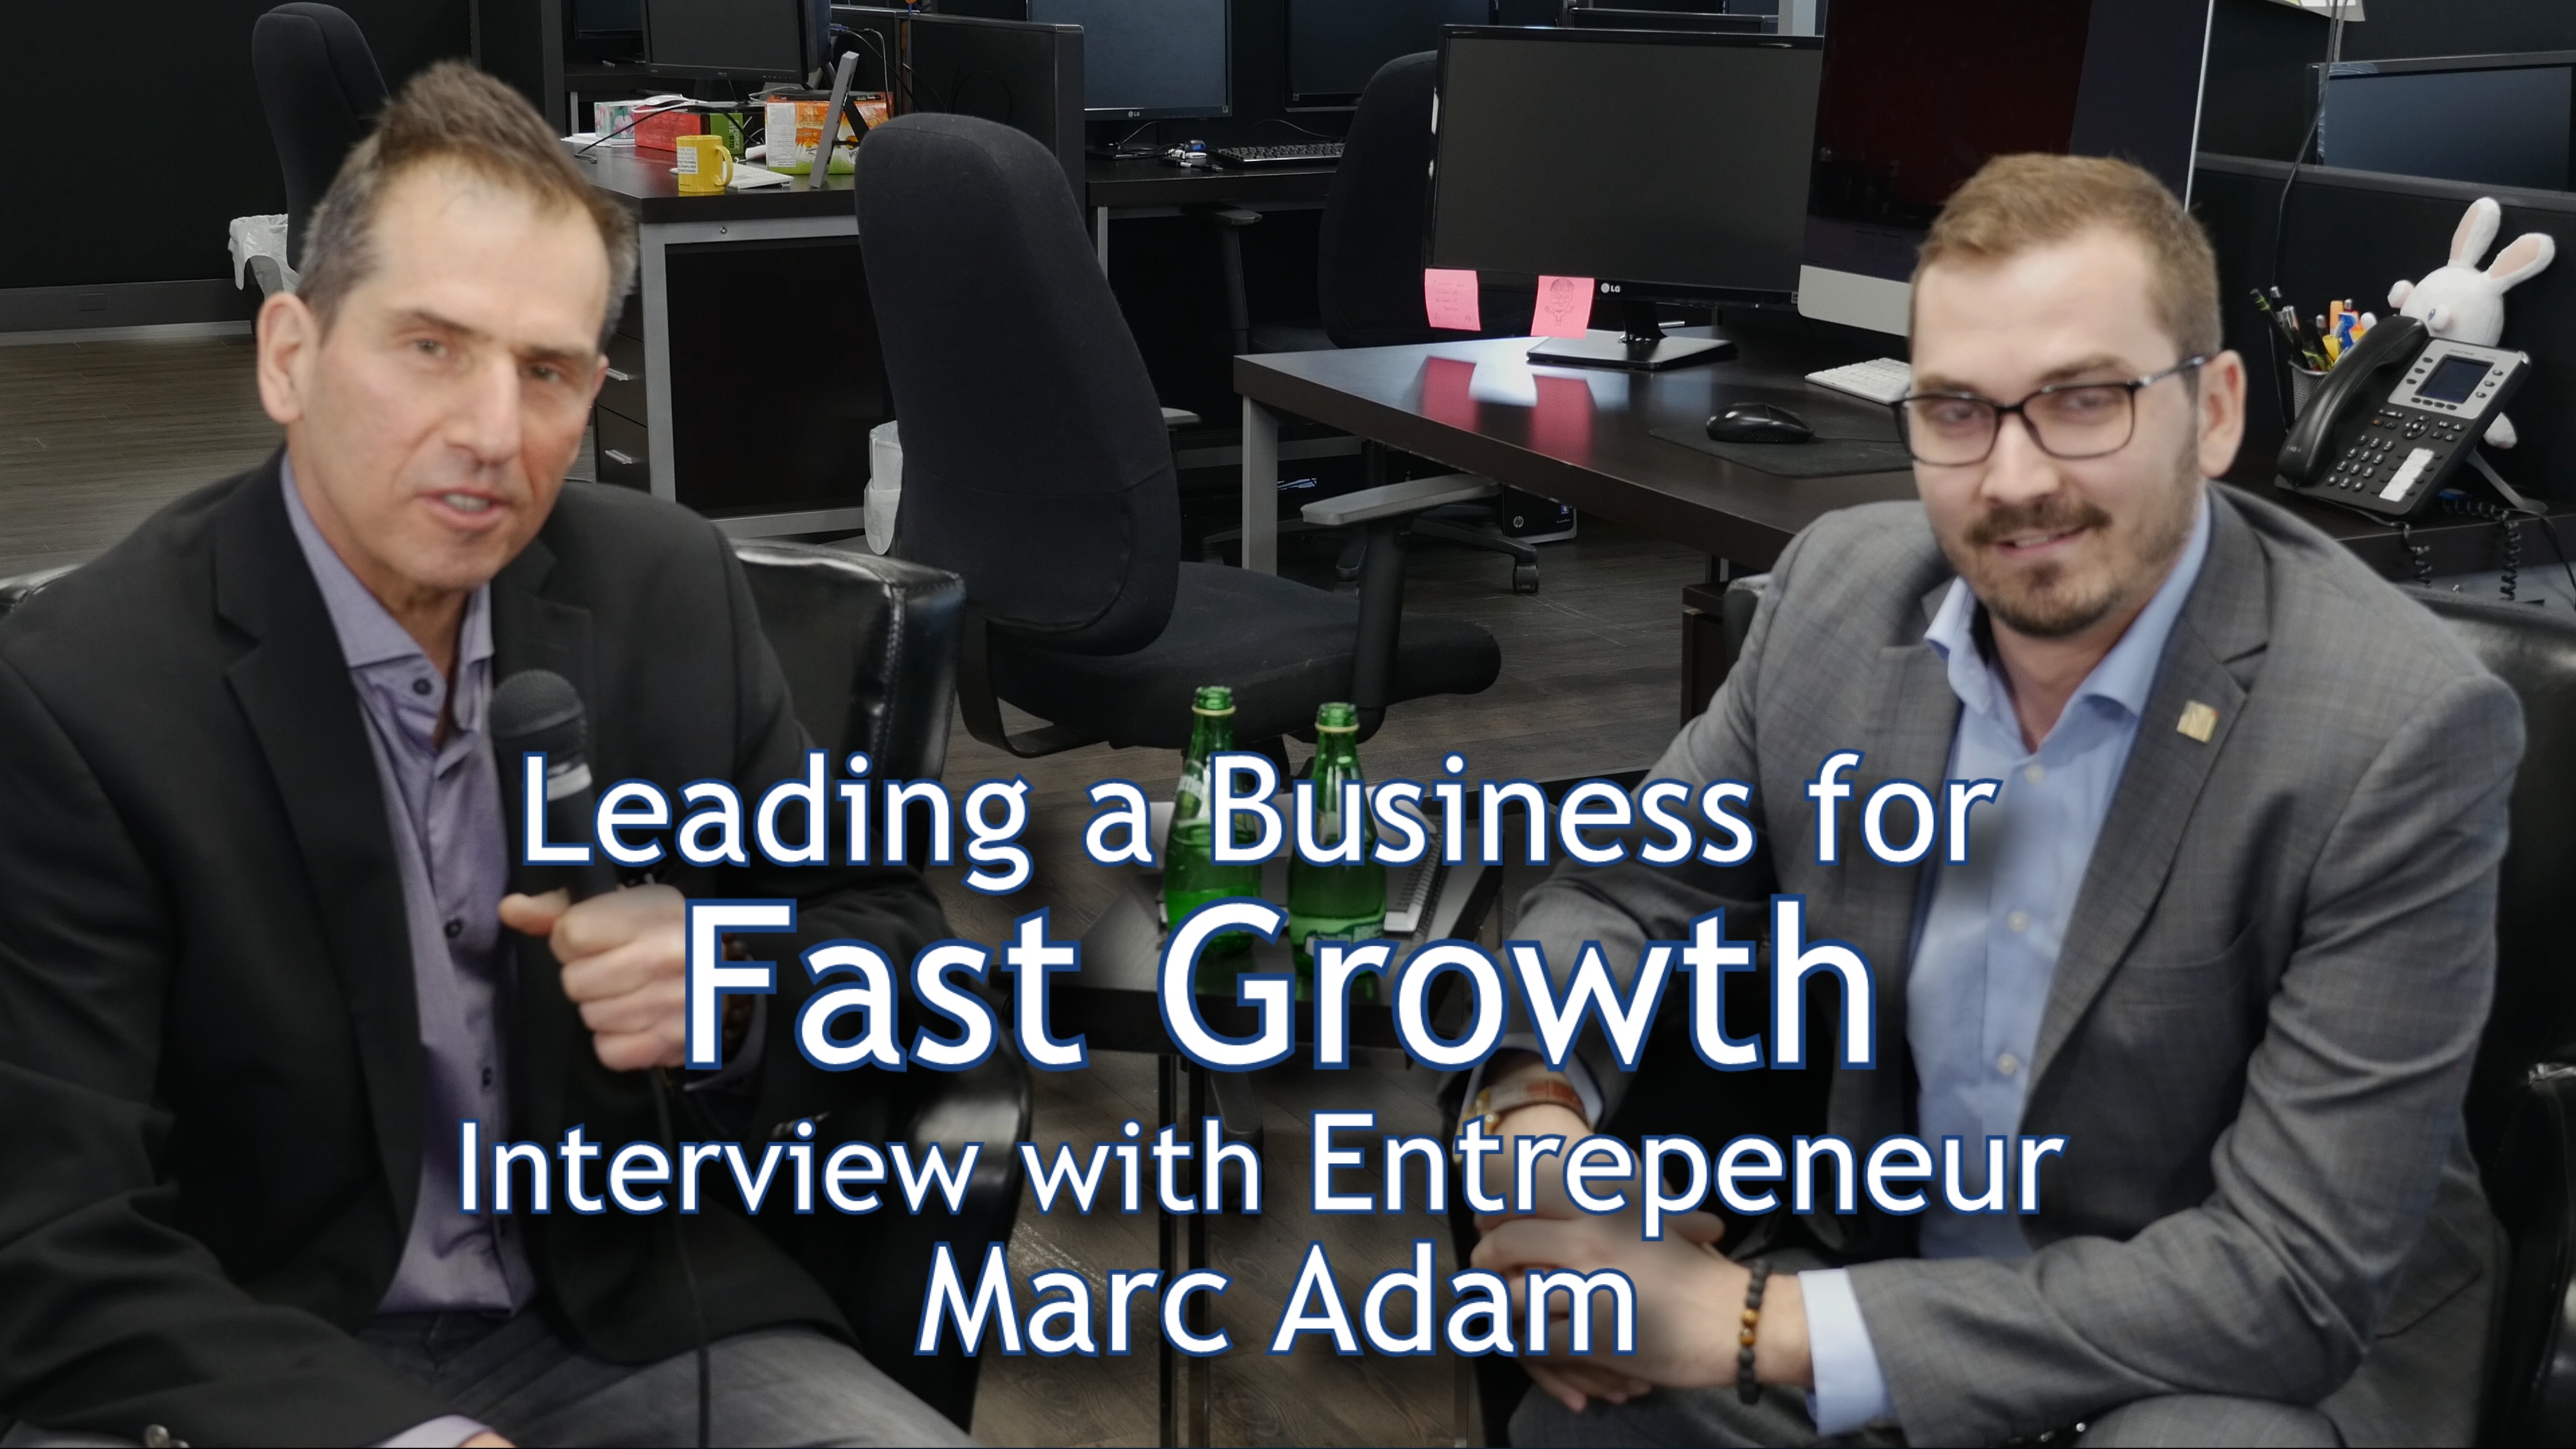 fast business growth